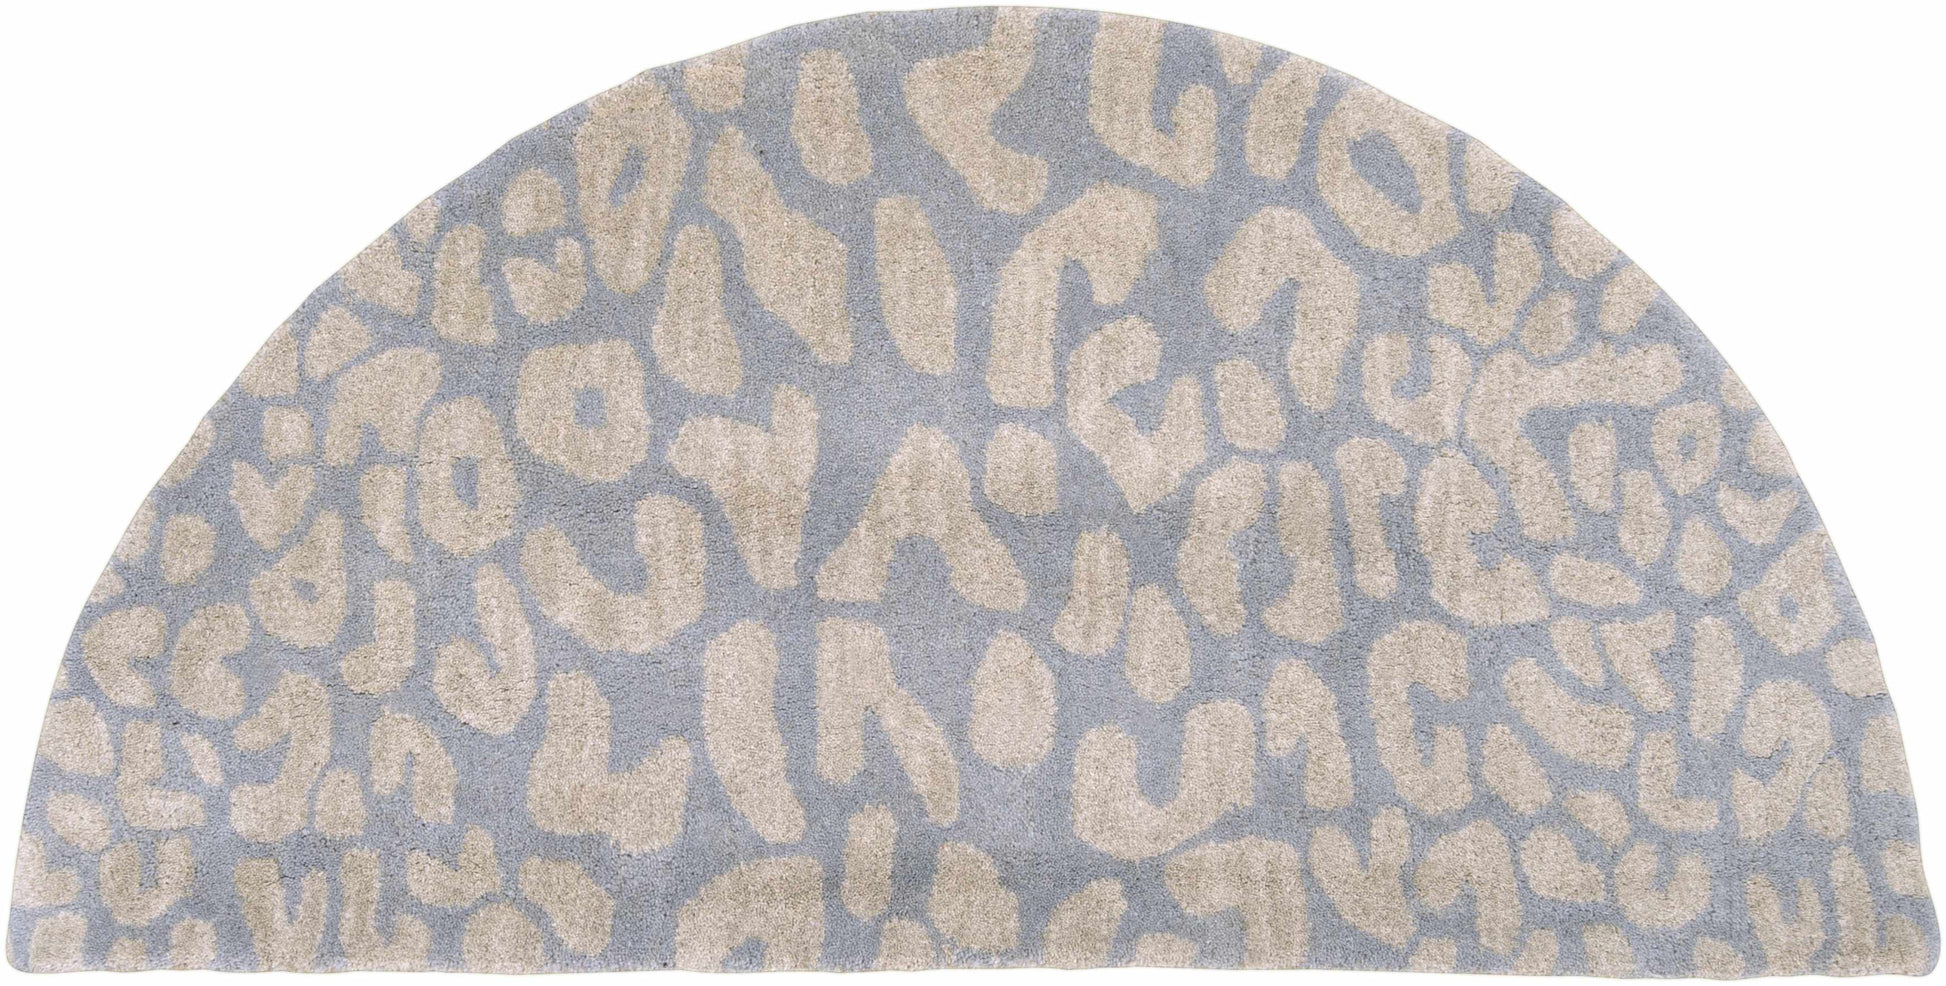 Boutique Rugs Rugs 2' x 4' Hearth Curwensville Leopard Print Area Rug